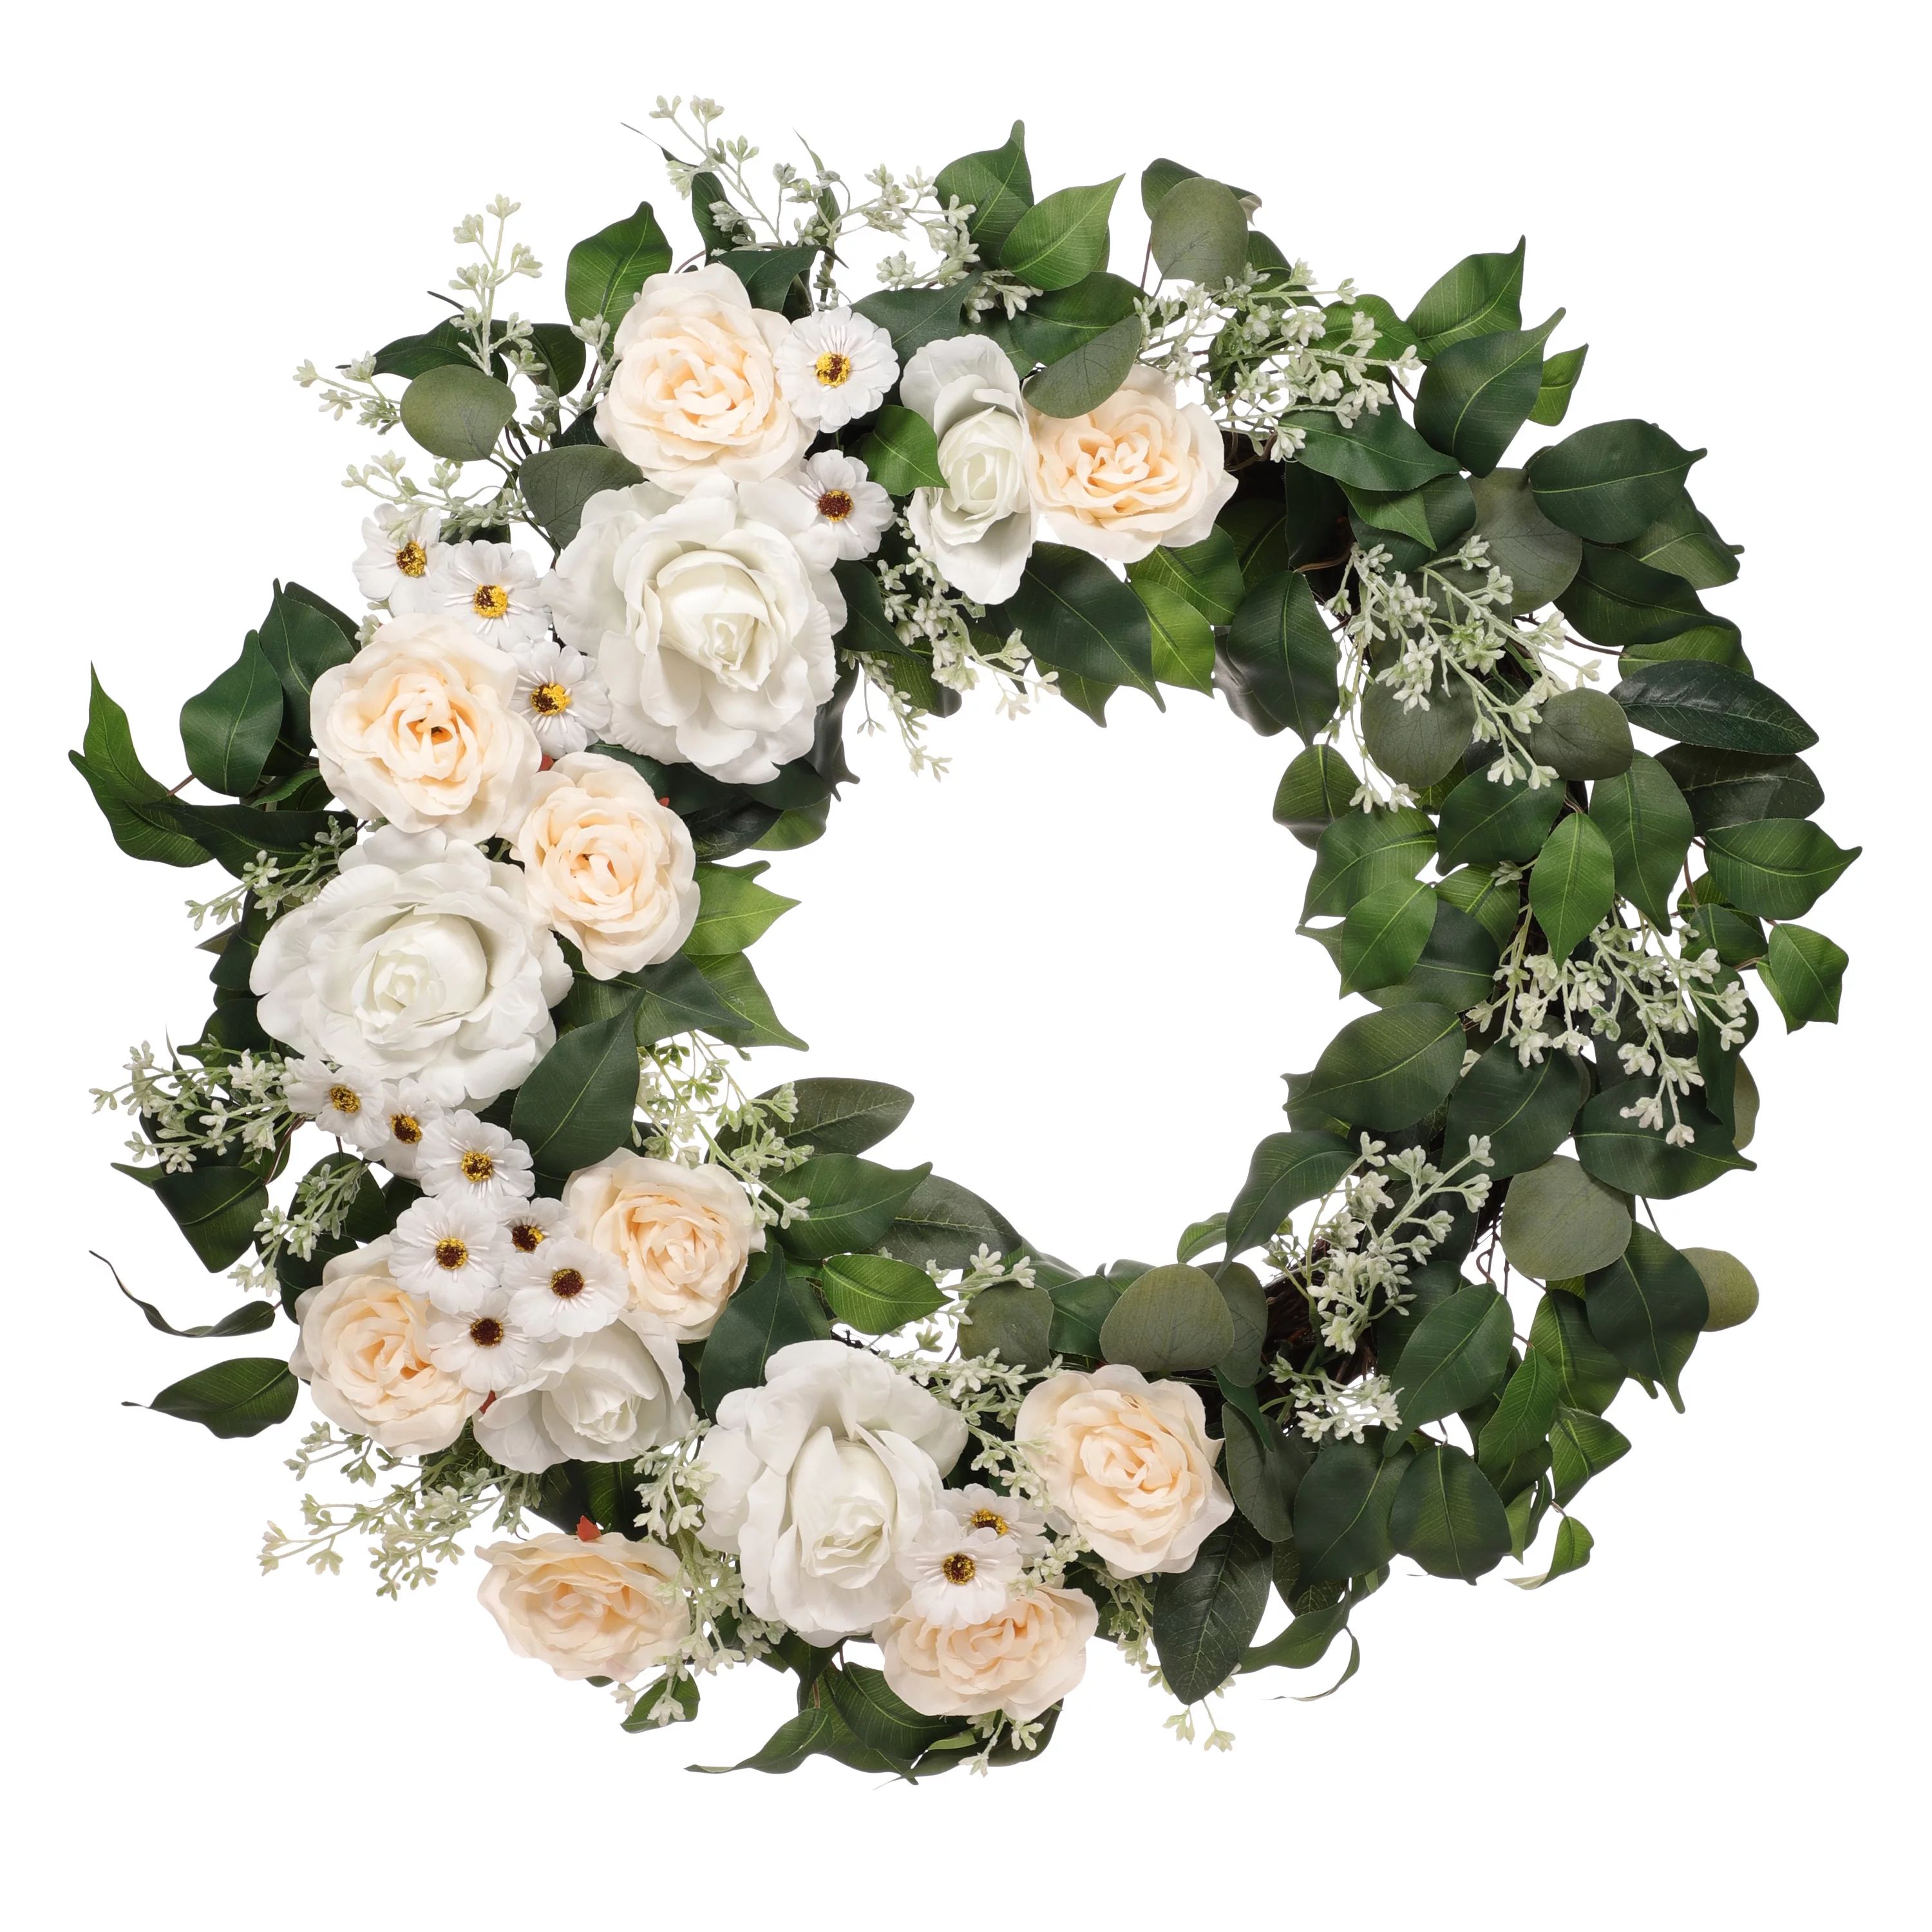 30" Artificial Rose, Camellia, Babys breath Floral Spring Wreath with Green Leaves | Walmart (US)